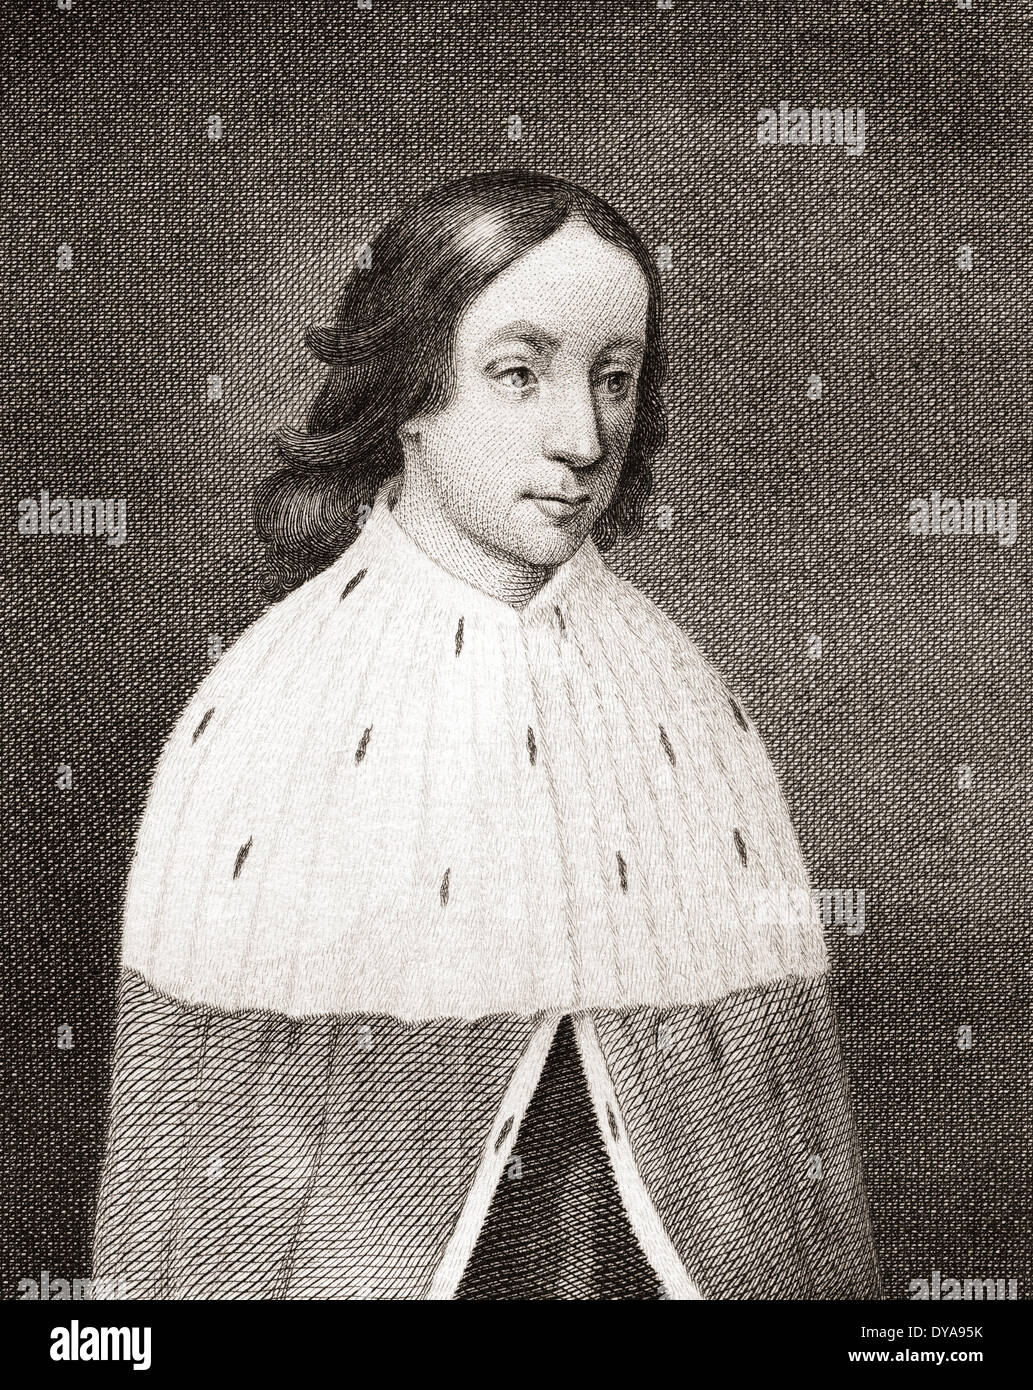 James IV, King of Scots, 1473 – 1513. Stock Photo